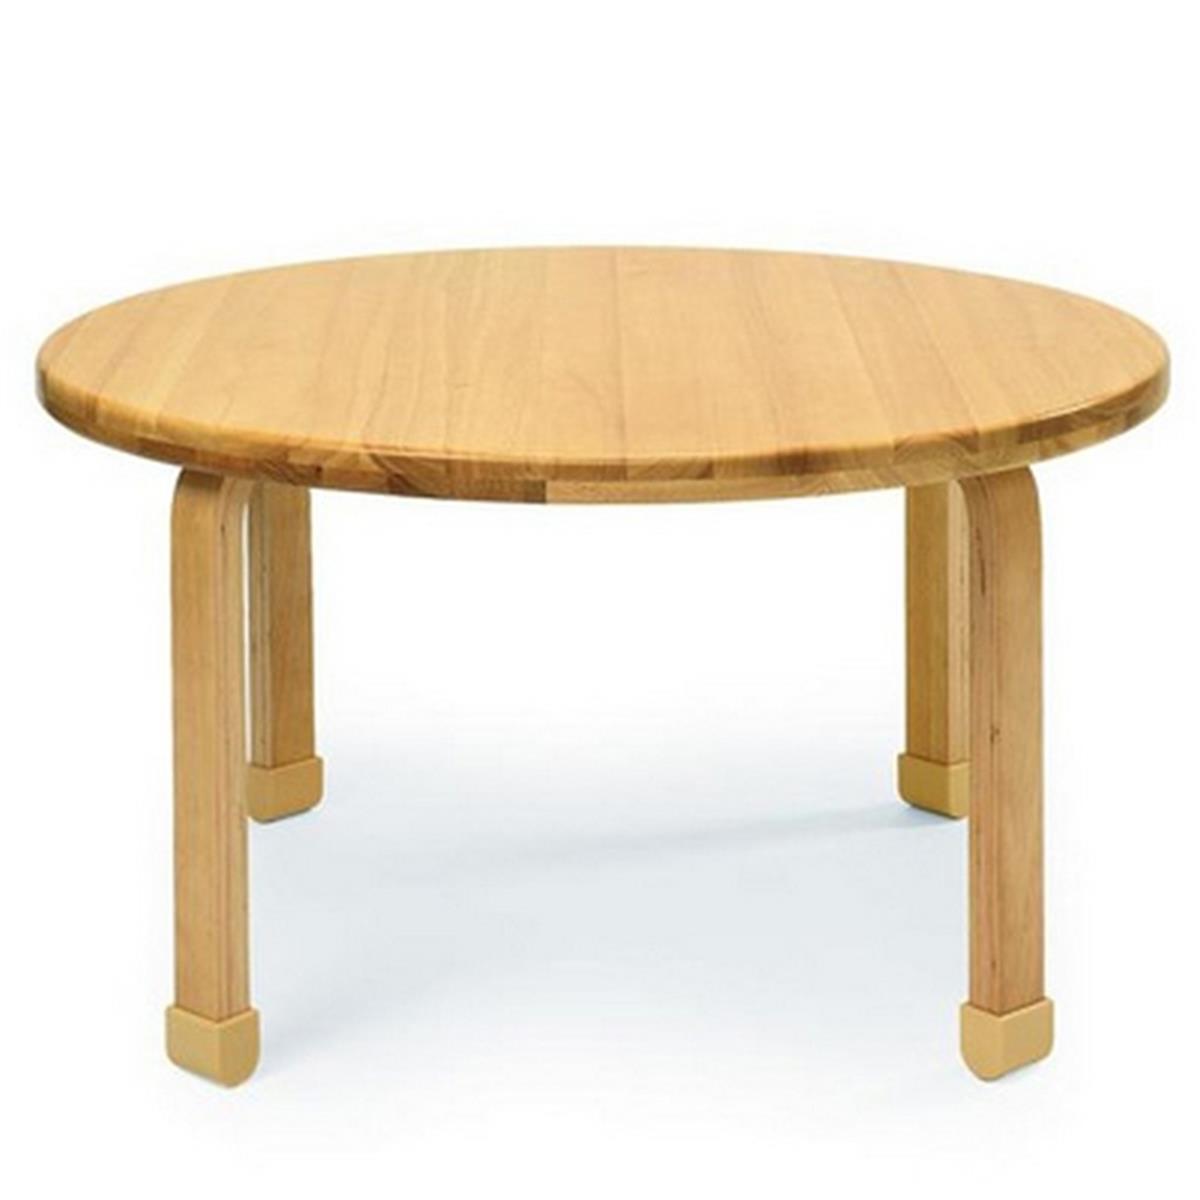 Angeles Ab7820l20 36 In. Dia. Round Natural Wood Table With 20 In. Legs